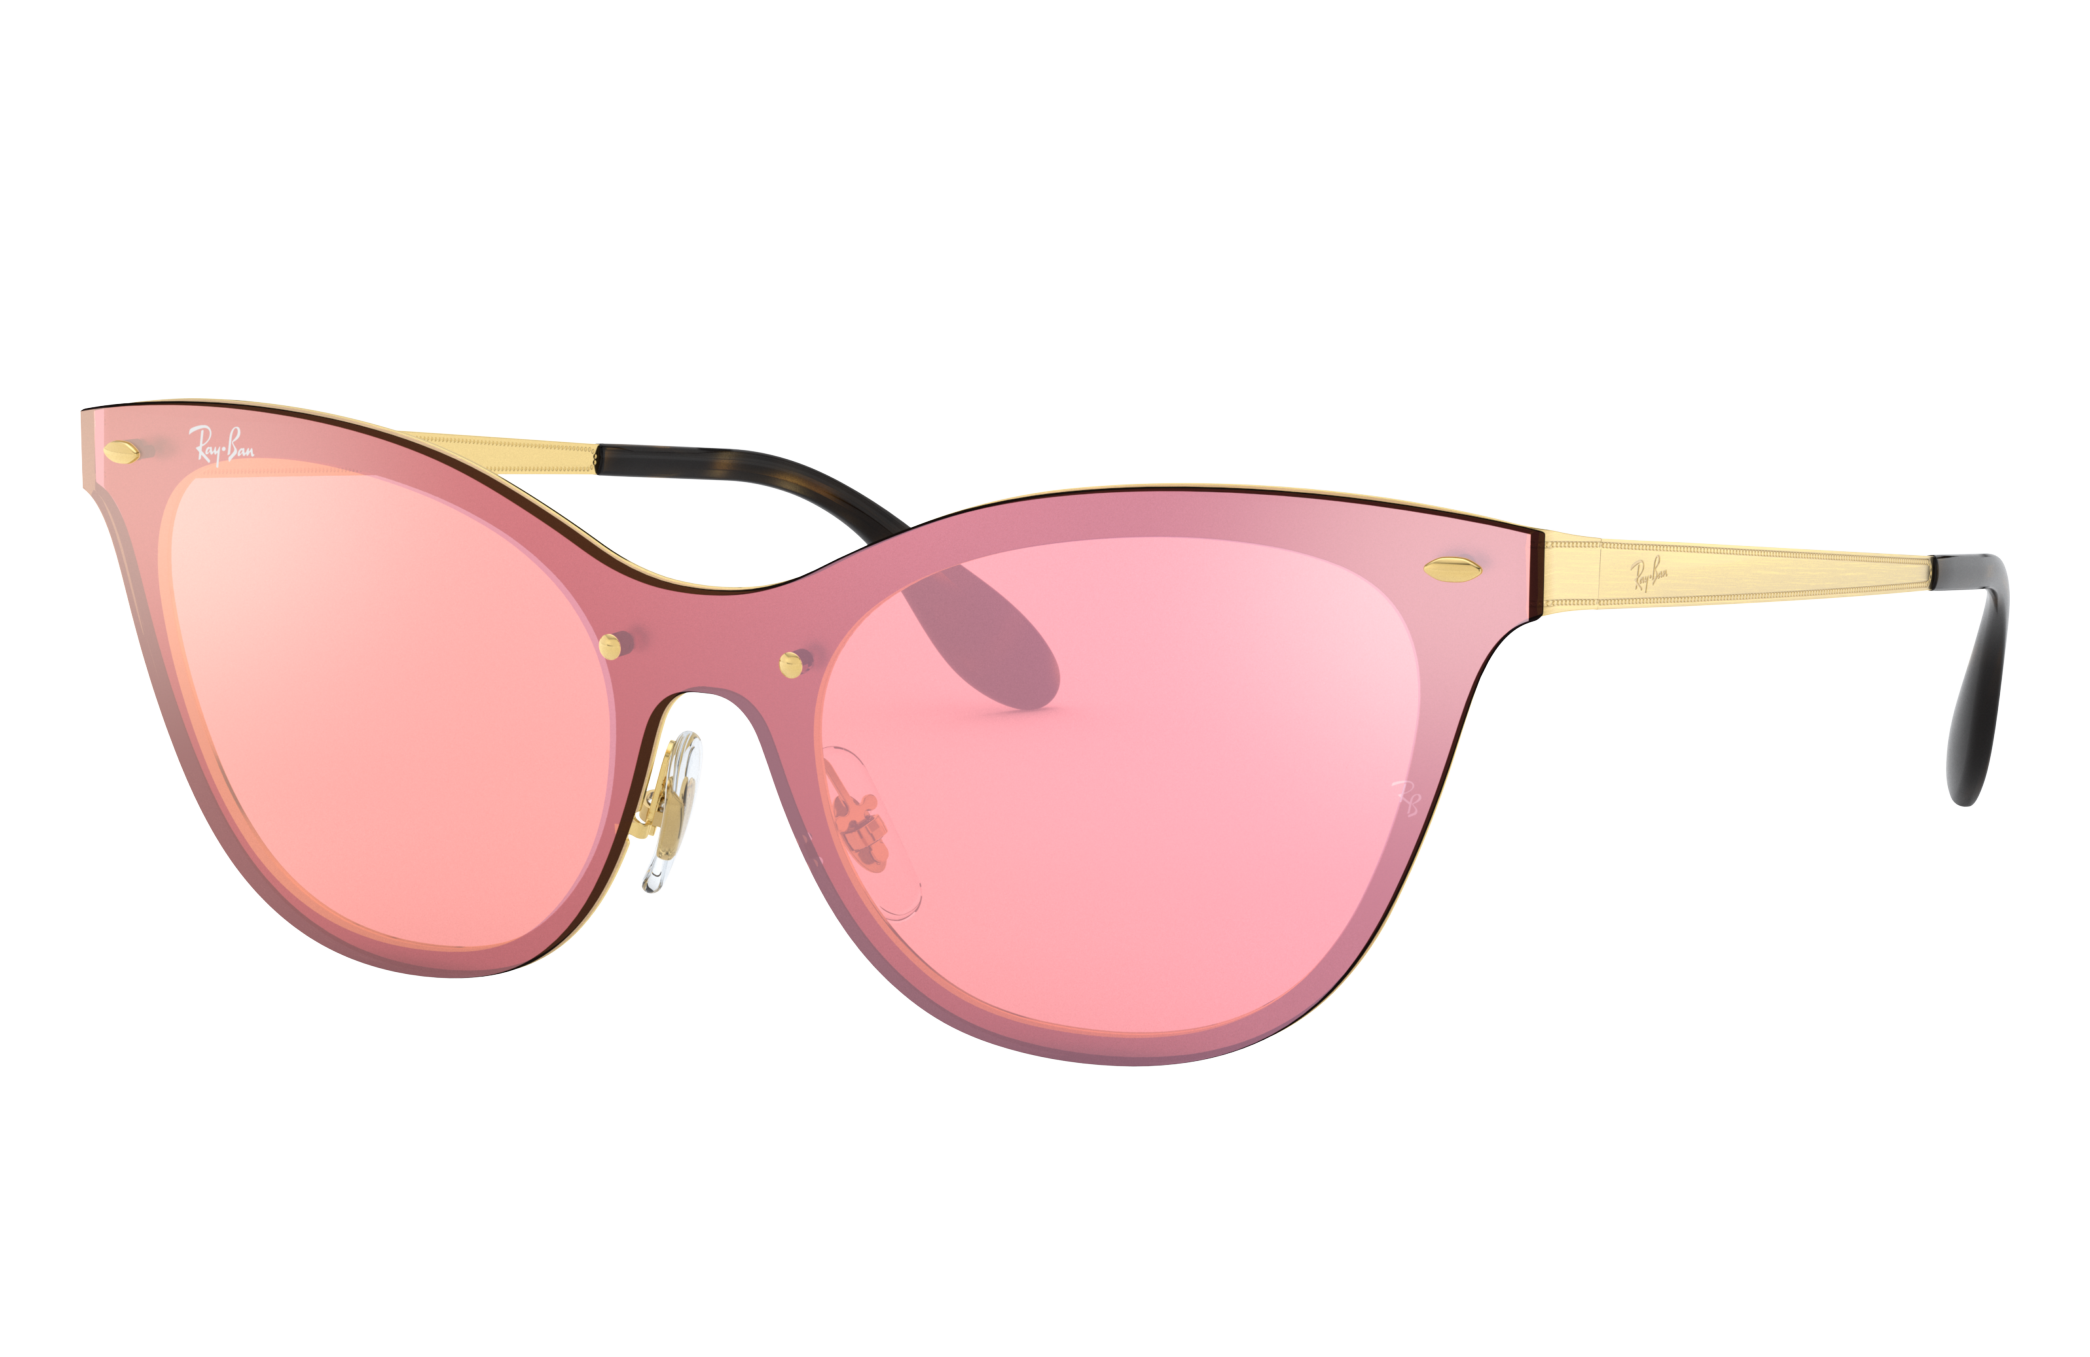 Blaze Cat Eye Sunglasses in Gold and Pink | Ray-Ban®